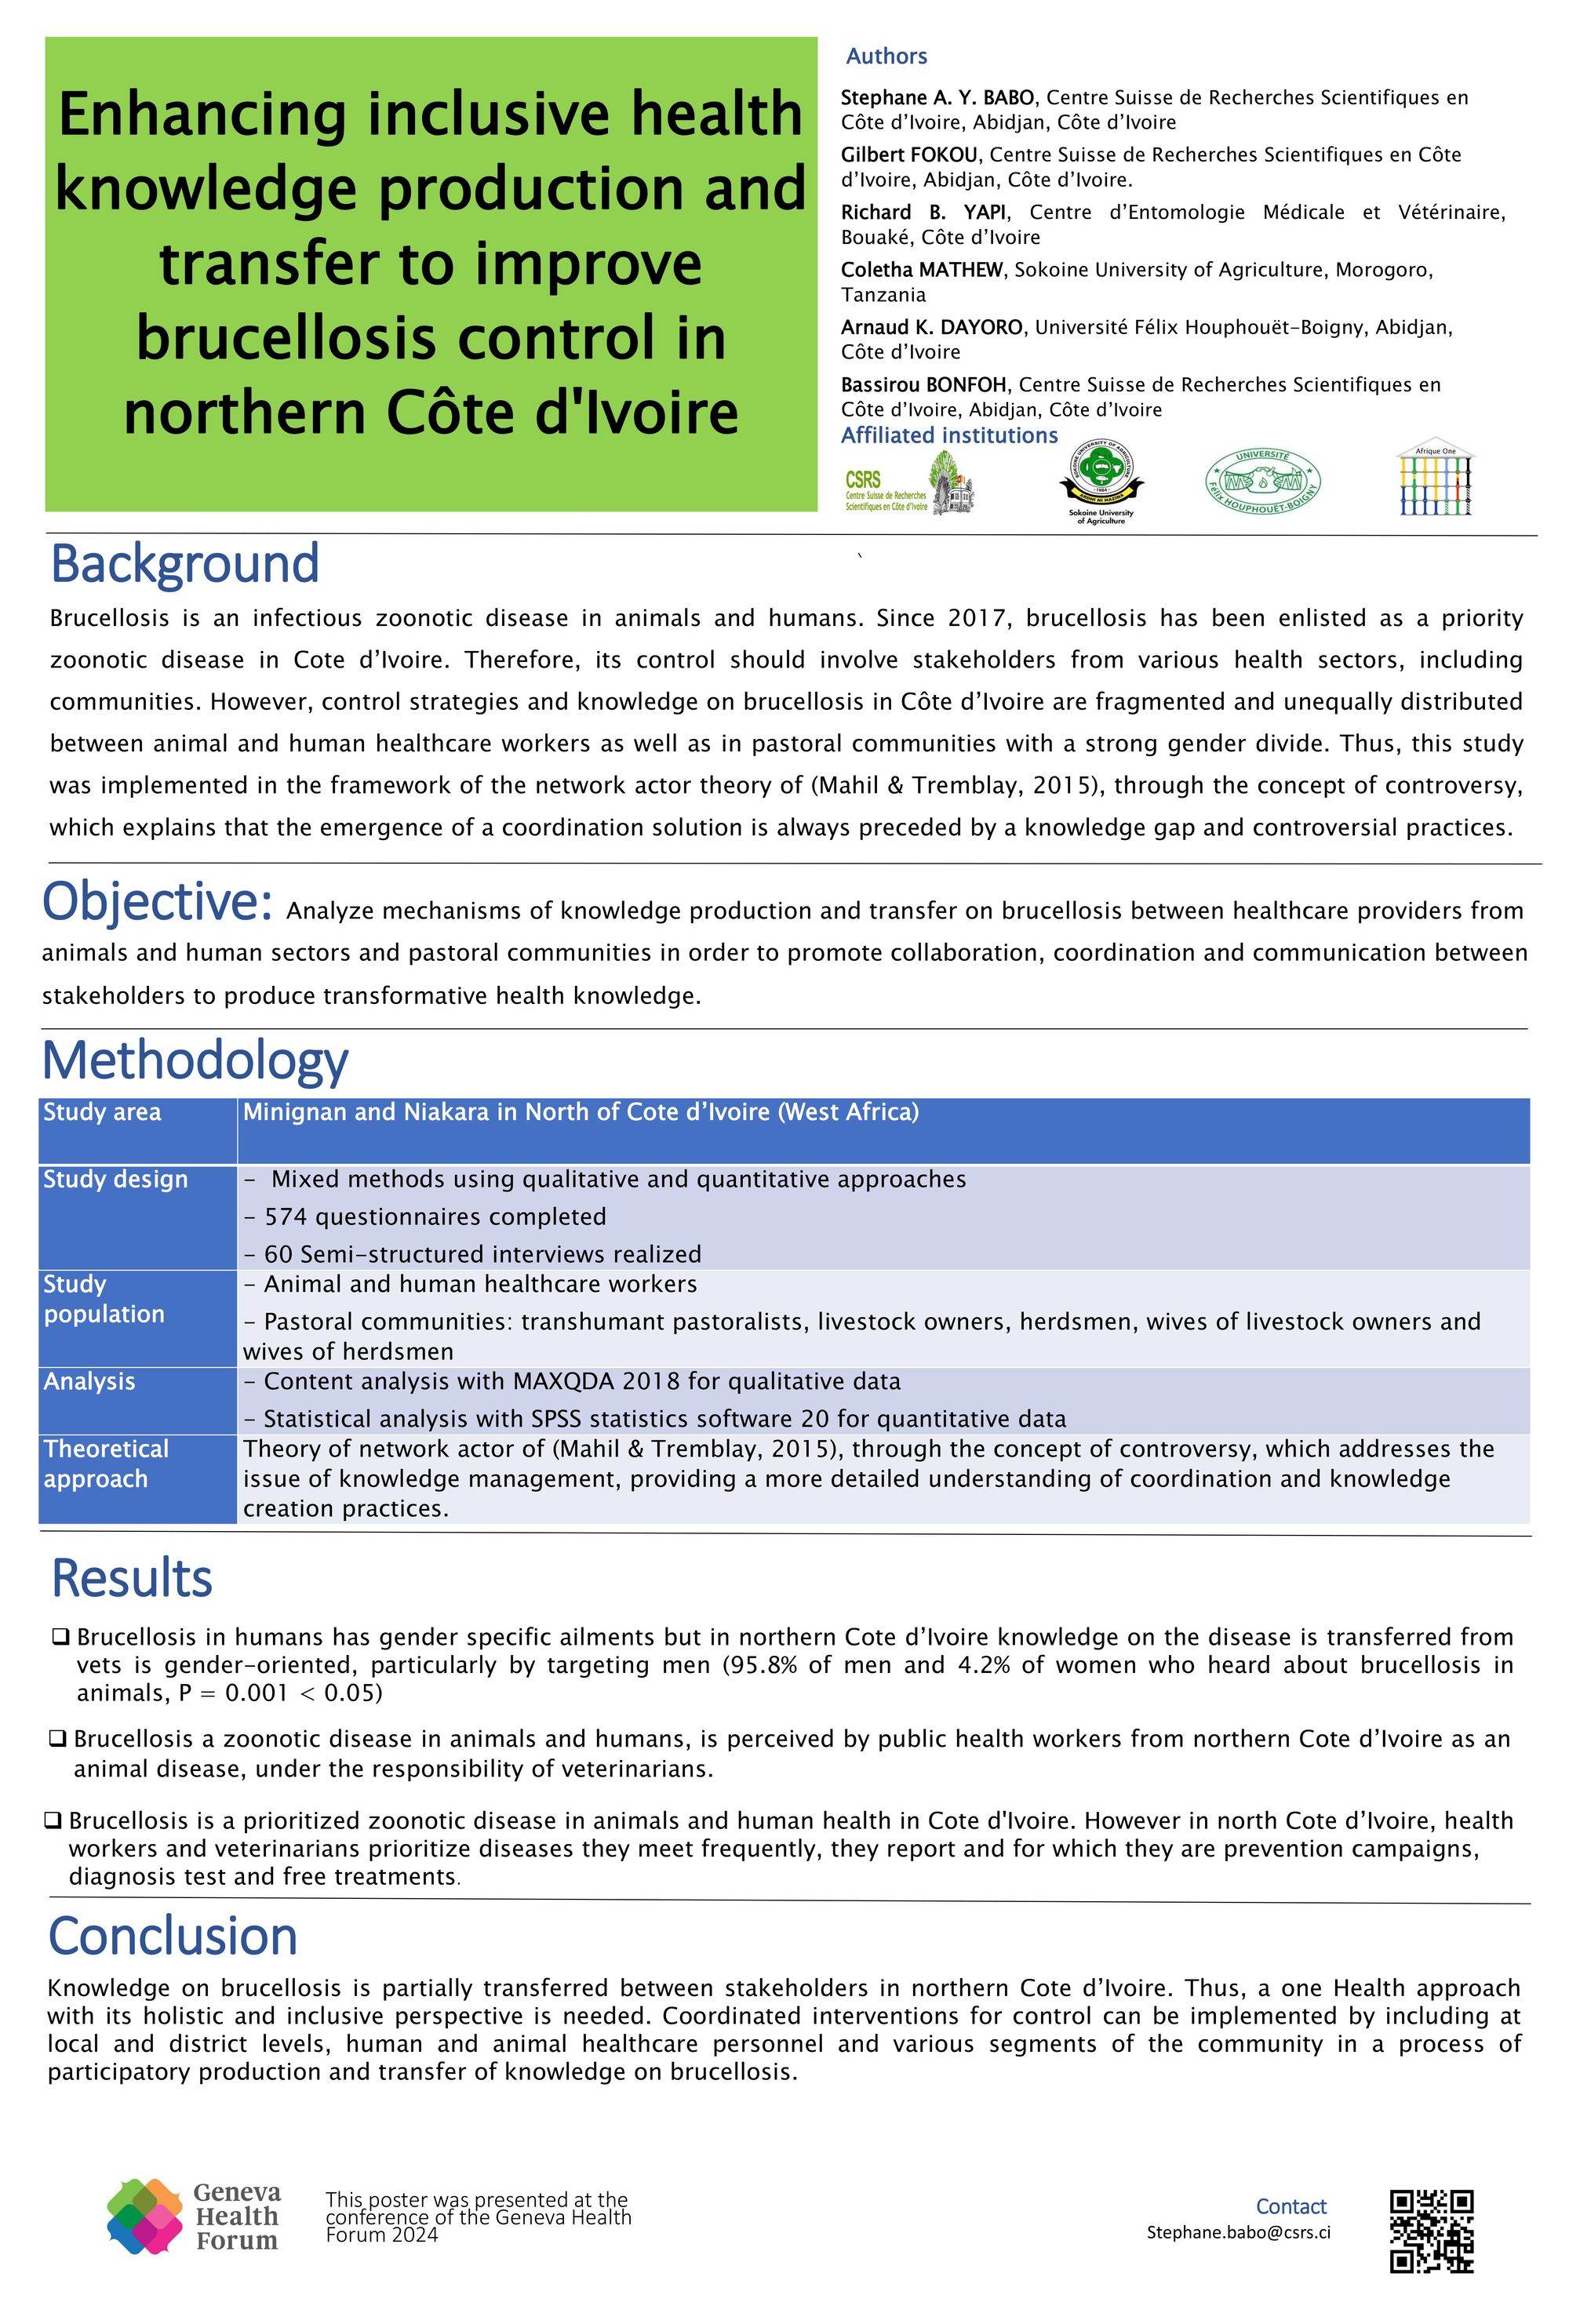 Enhancing inclusive health knowledge production and transfer to improve brucellosis control in northern Côte d'Ivoire